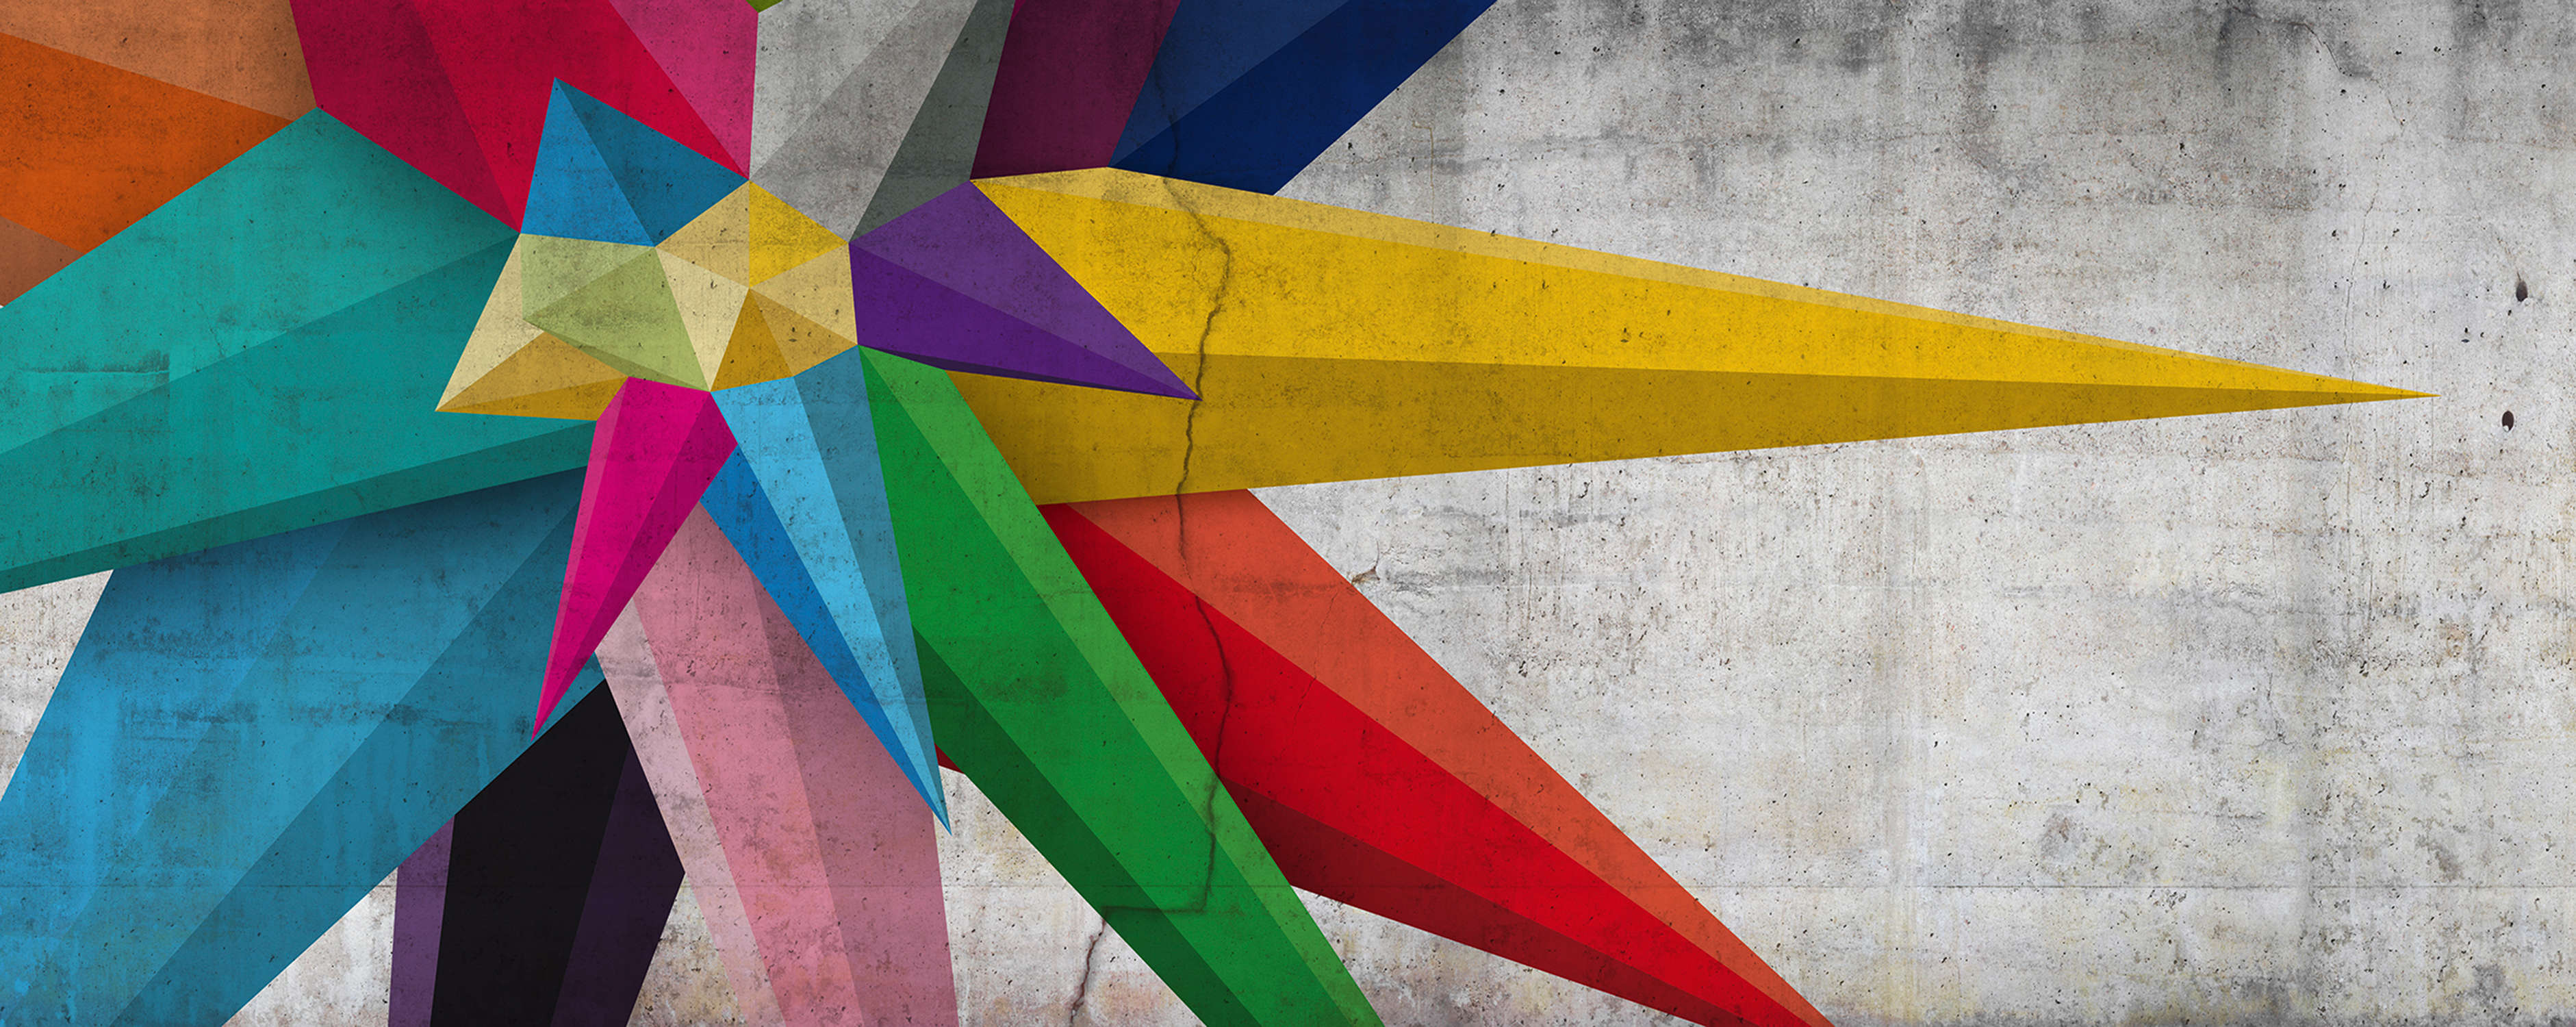             Concrete mural with star graphic in polygon style - colourful, grey, yellow
        